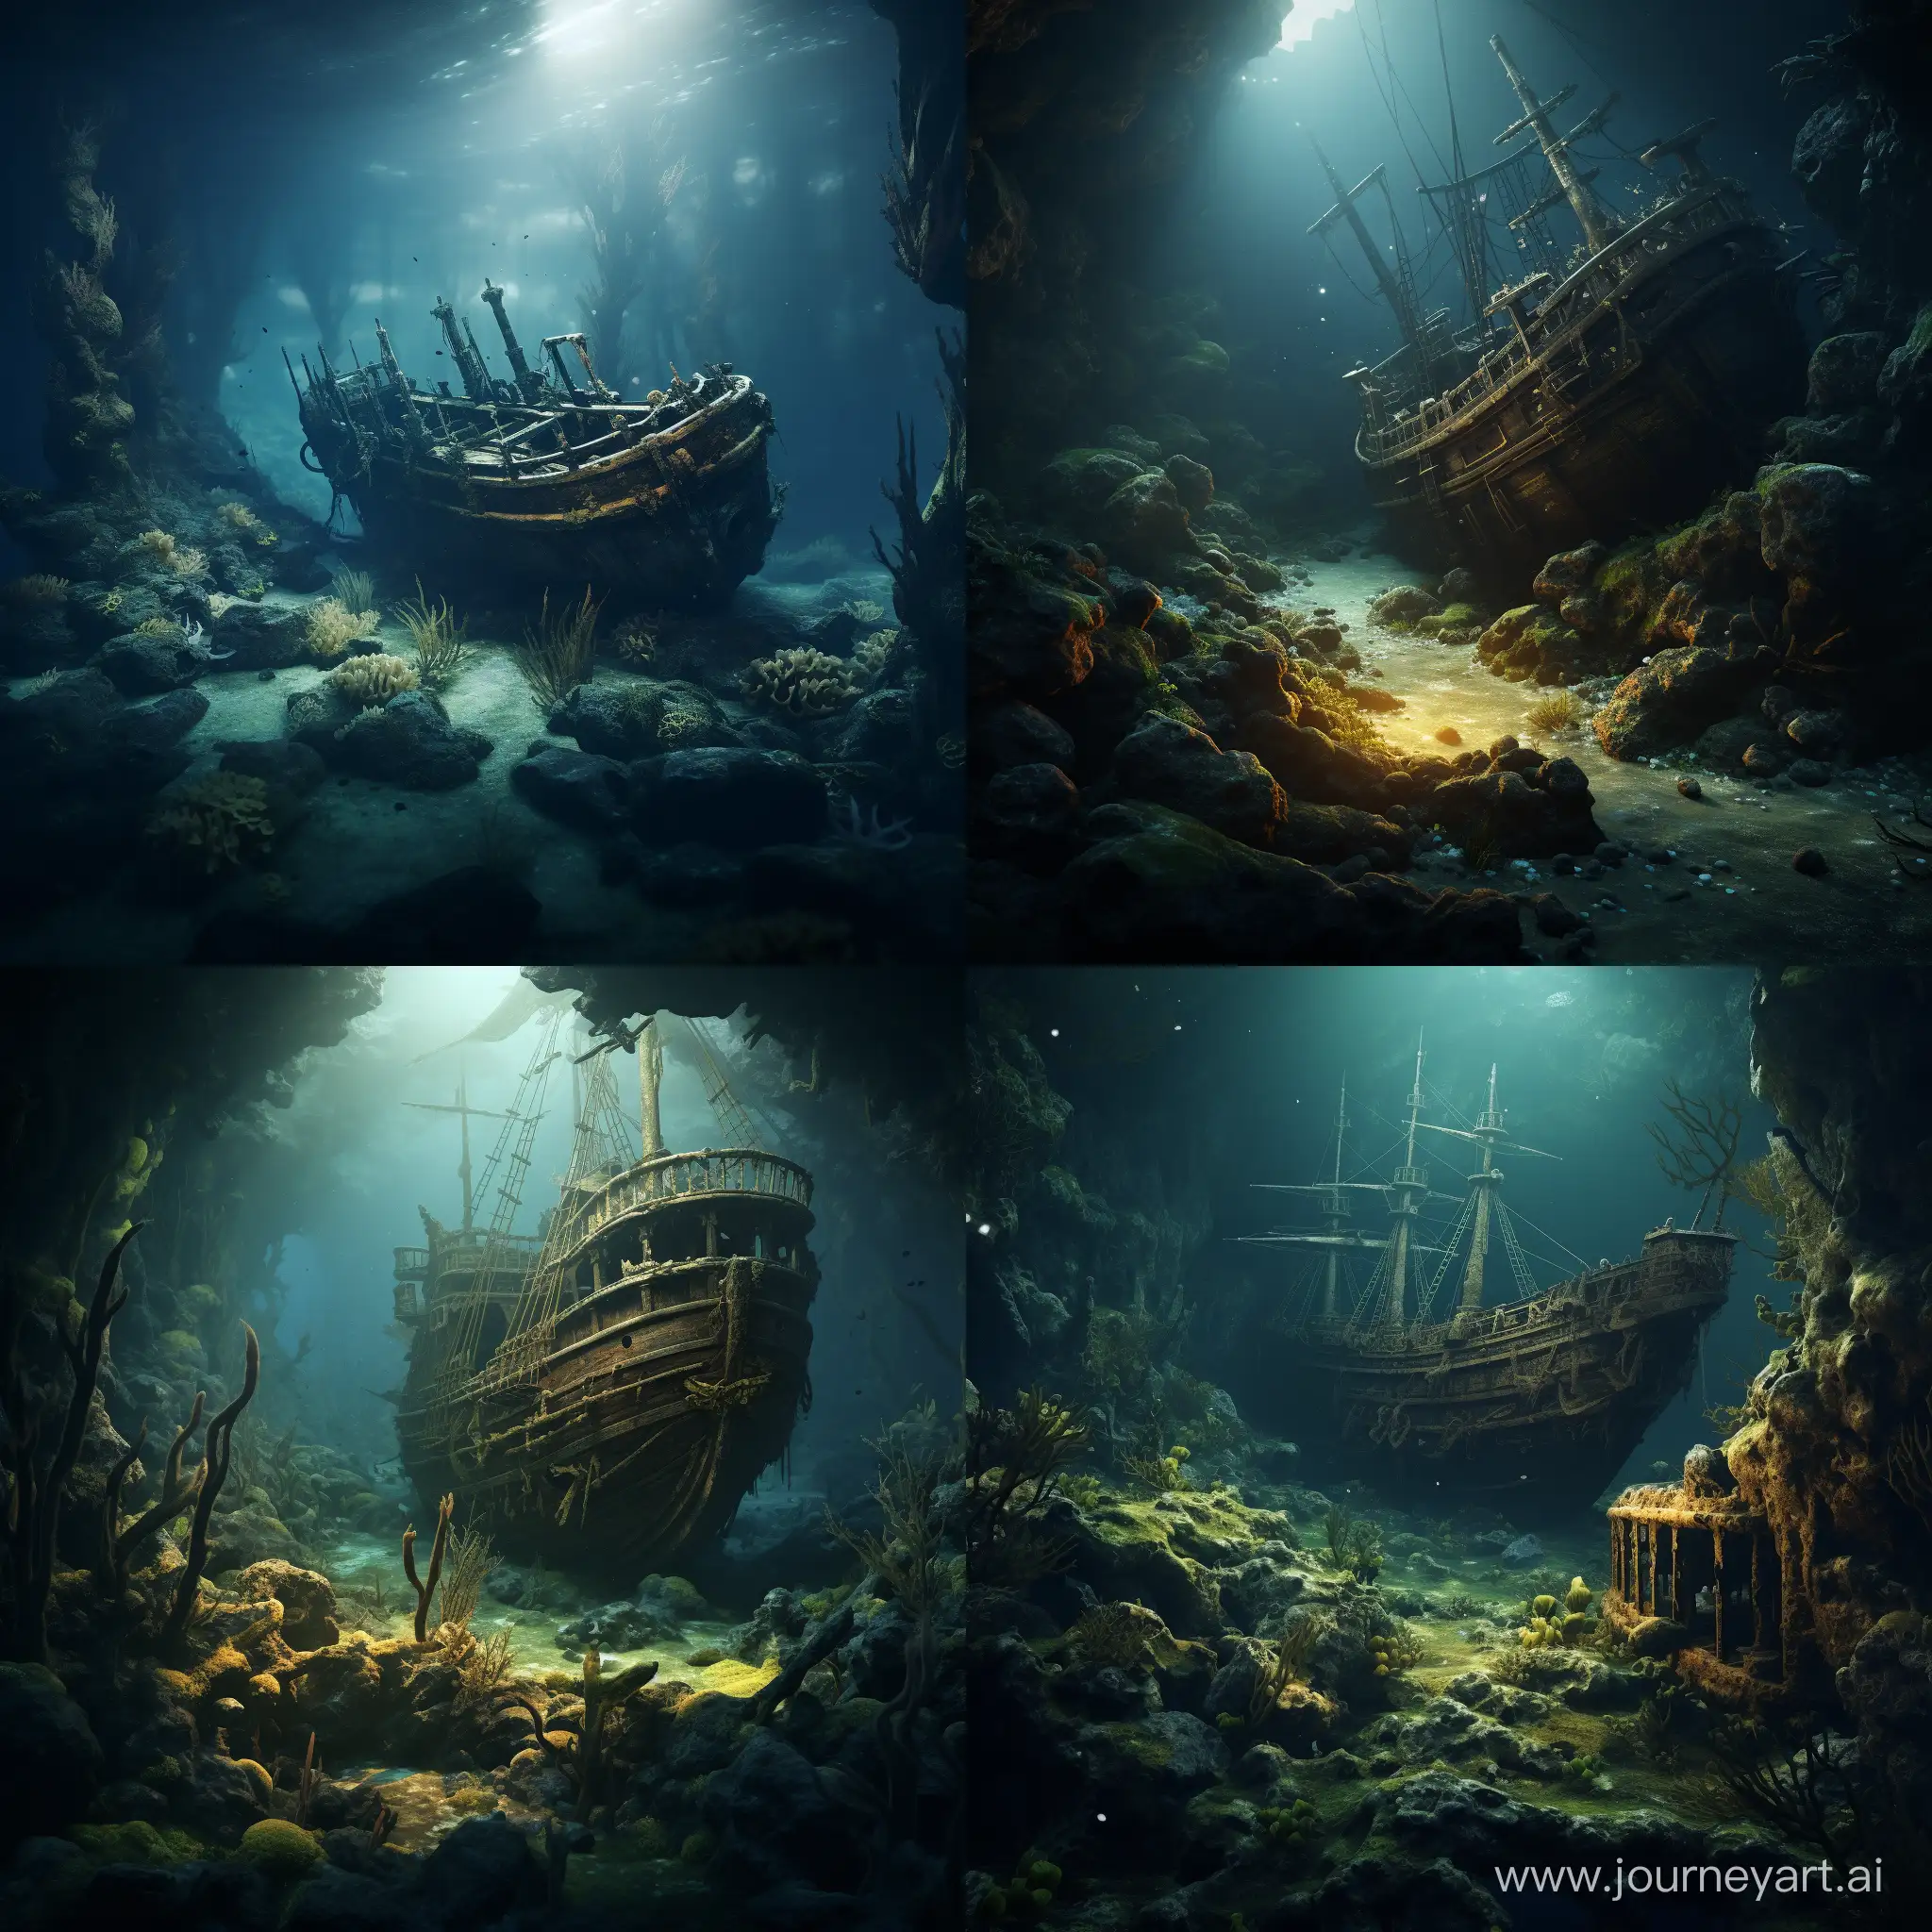 Submerged-Ancient-Shipwreck-Underwater-Exploration-on-a-Dark-Planet